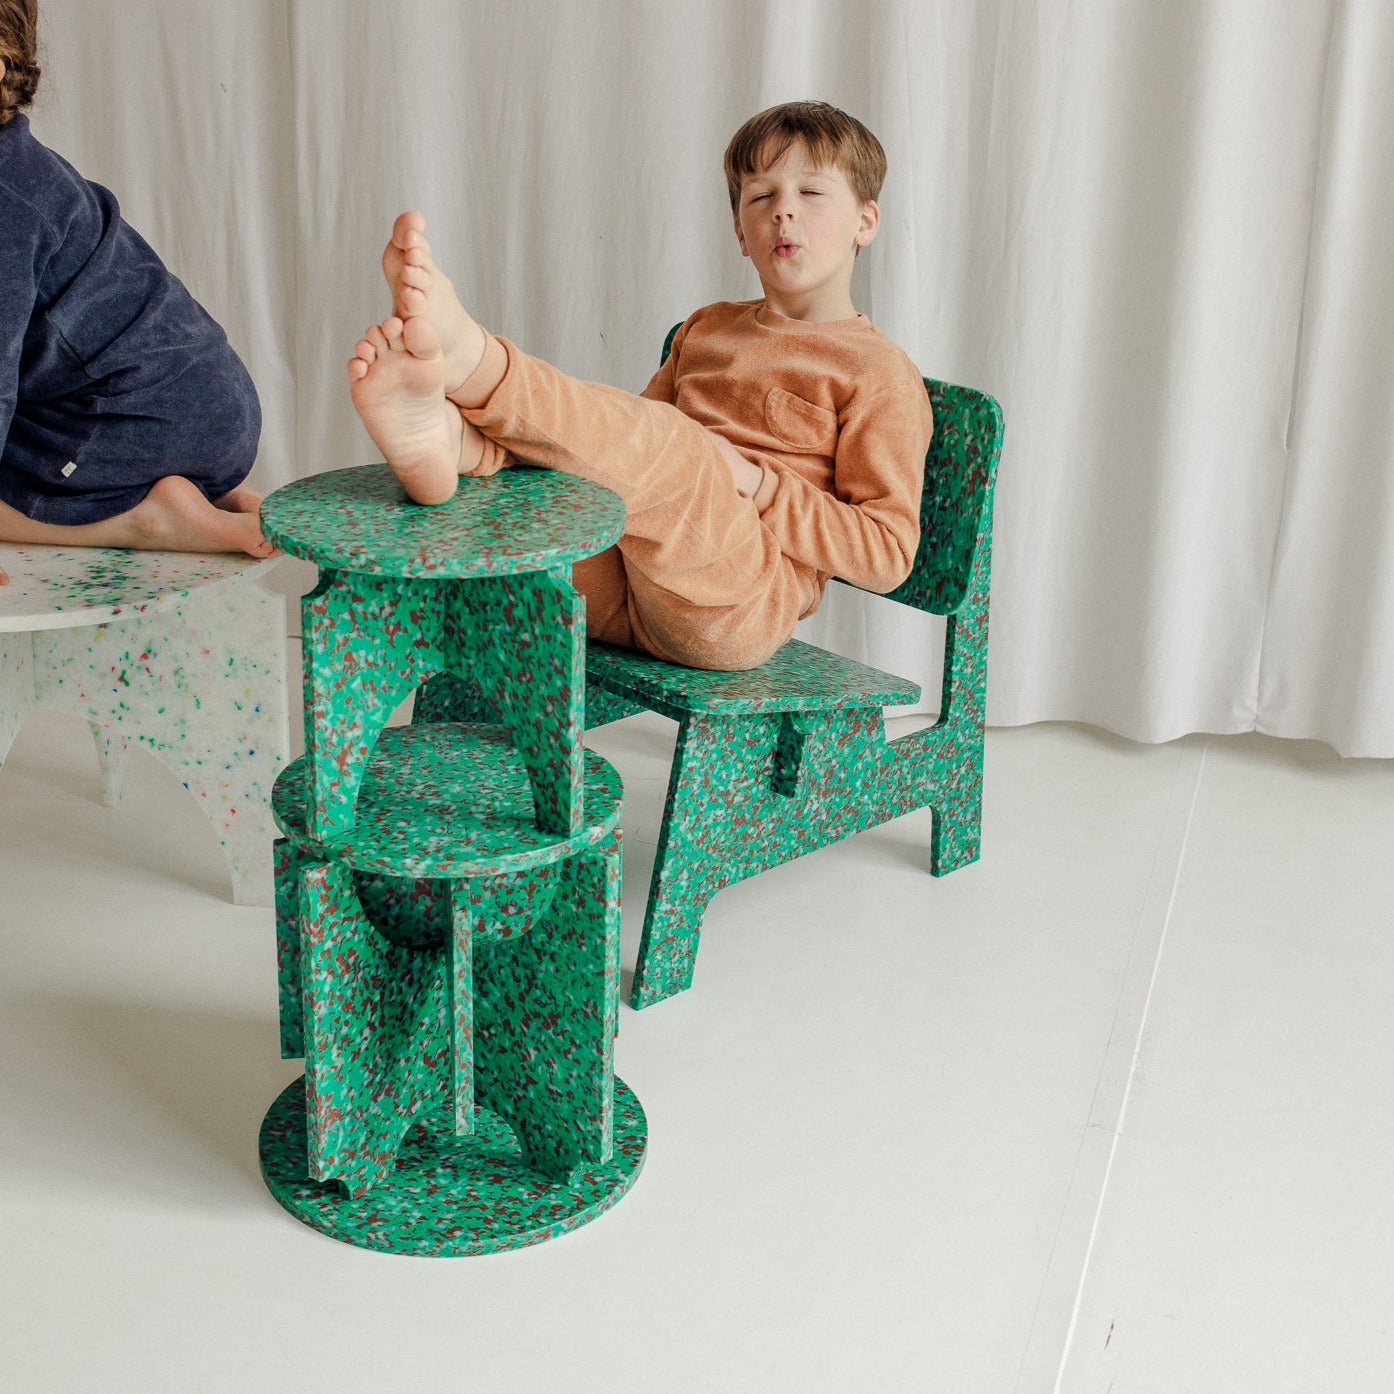 KID SITTING ON GREEN CHAIR BY THE MINIMONO PROJECT - BRAND FOR ECO FRIENDLY - PLAYFUL - MULTI FUNCTIONAL - SUSTAINABLE - HIGH QUALITY - DESIGN FURNITURE FROM RECYCLED PLASTIC FOR BOTH ADULT AND CHILDREN MADE IN BERLIN GERMANY